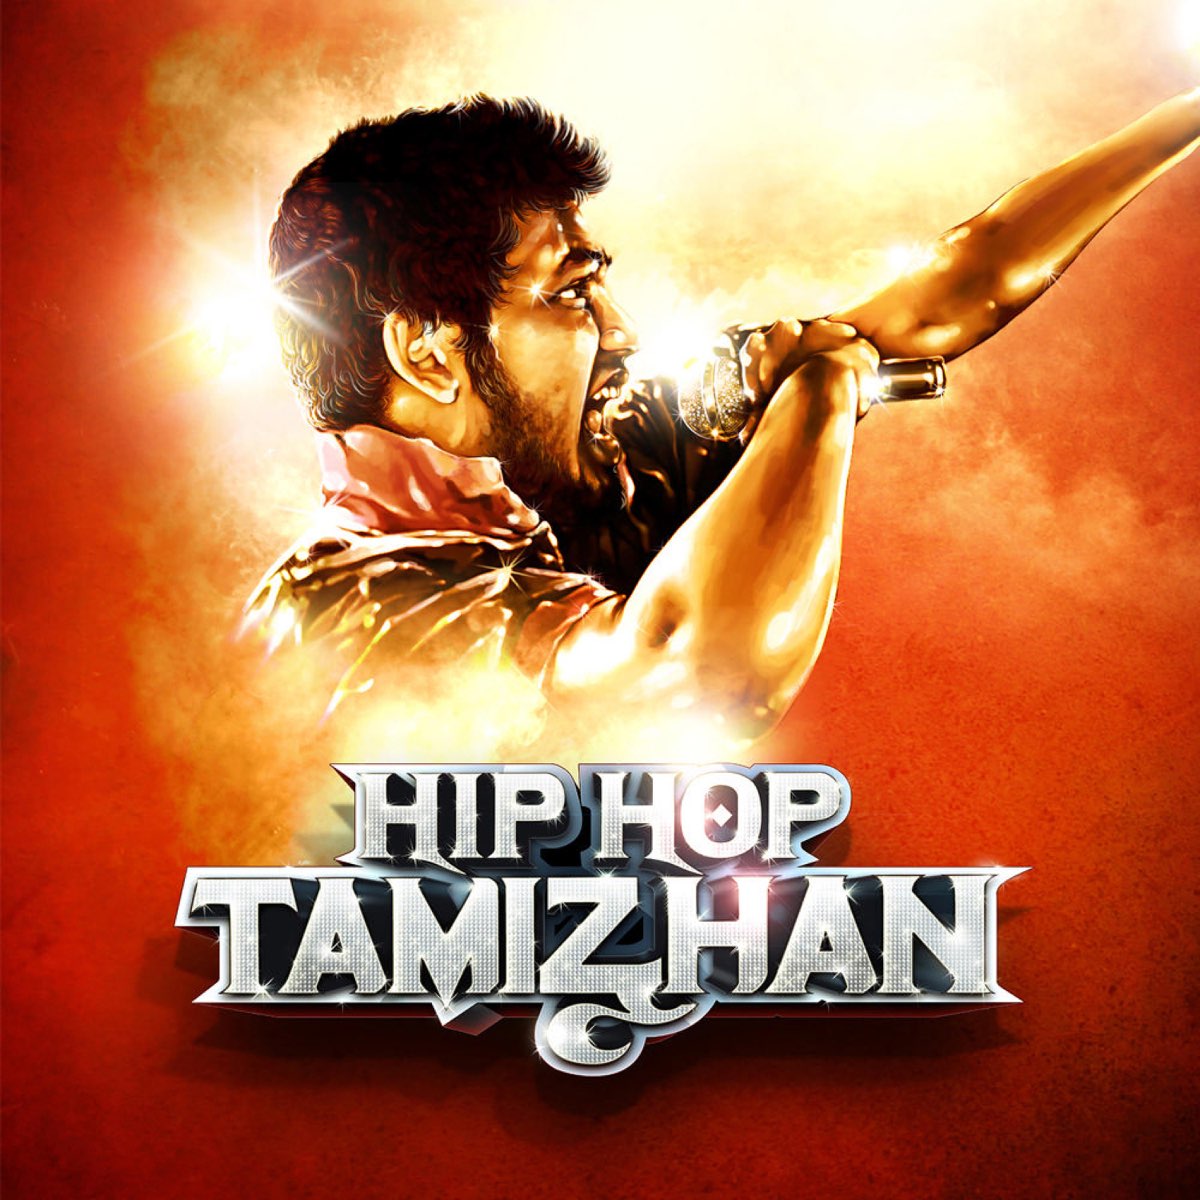 Hiphop Tamizhan by Hiphop Tamizha on Apple Music